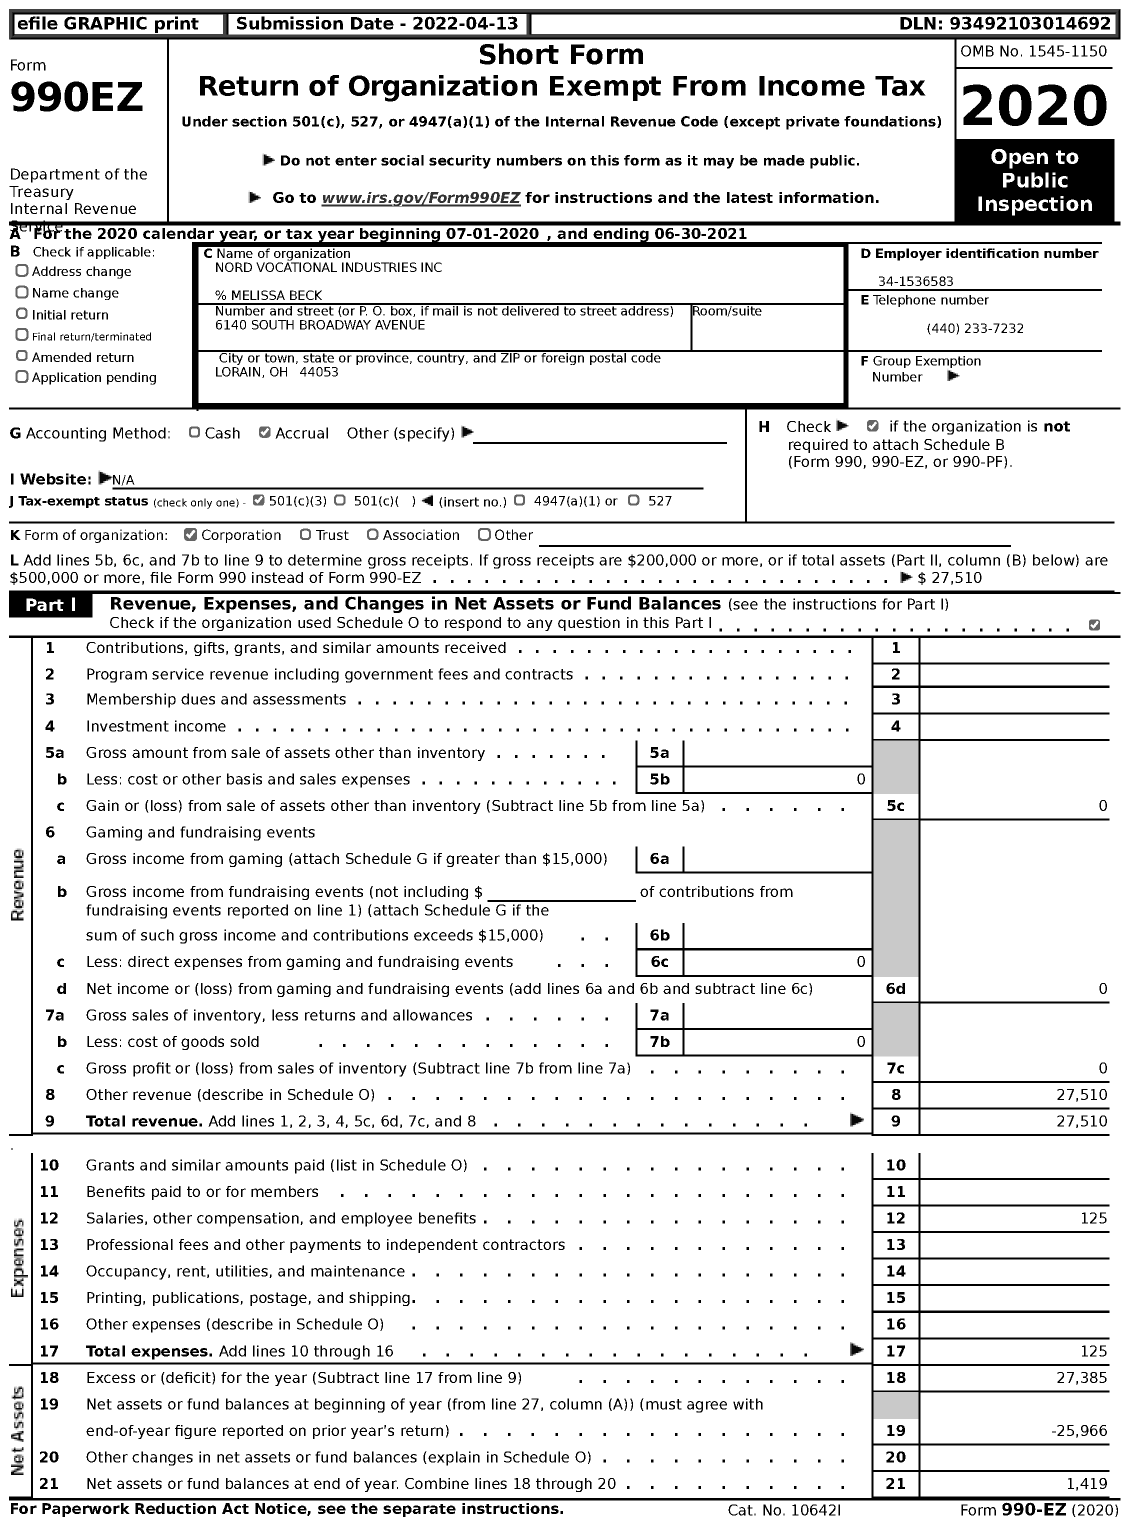 Image of first page of 2020 Form 990EZ for Nord Vocational Industries